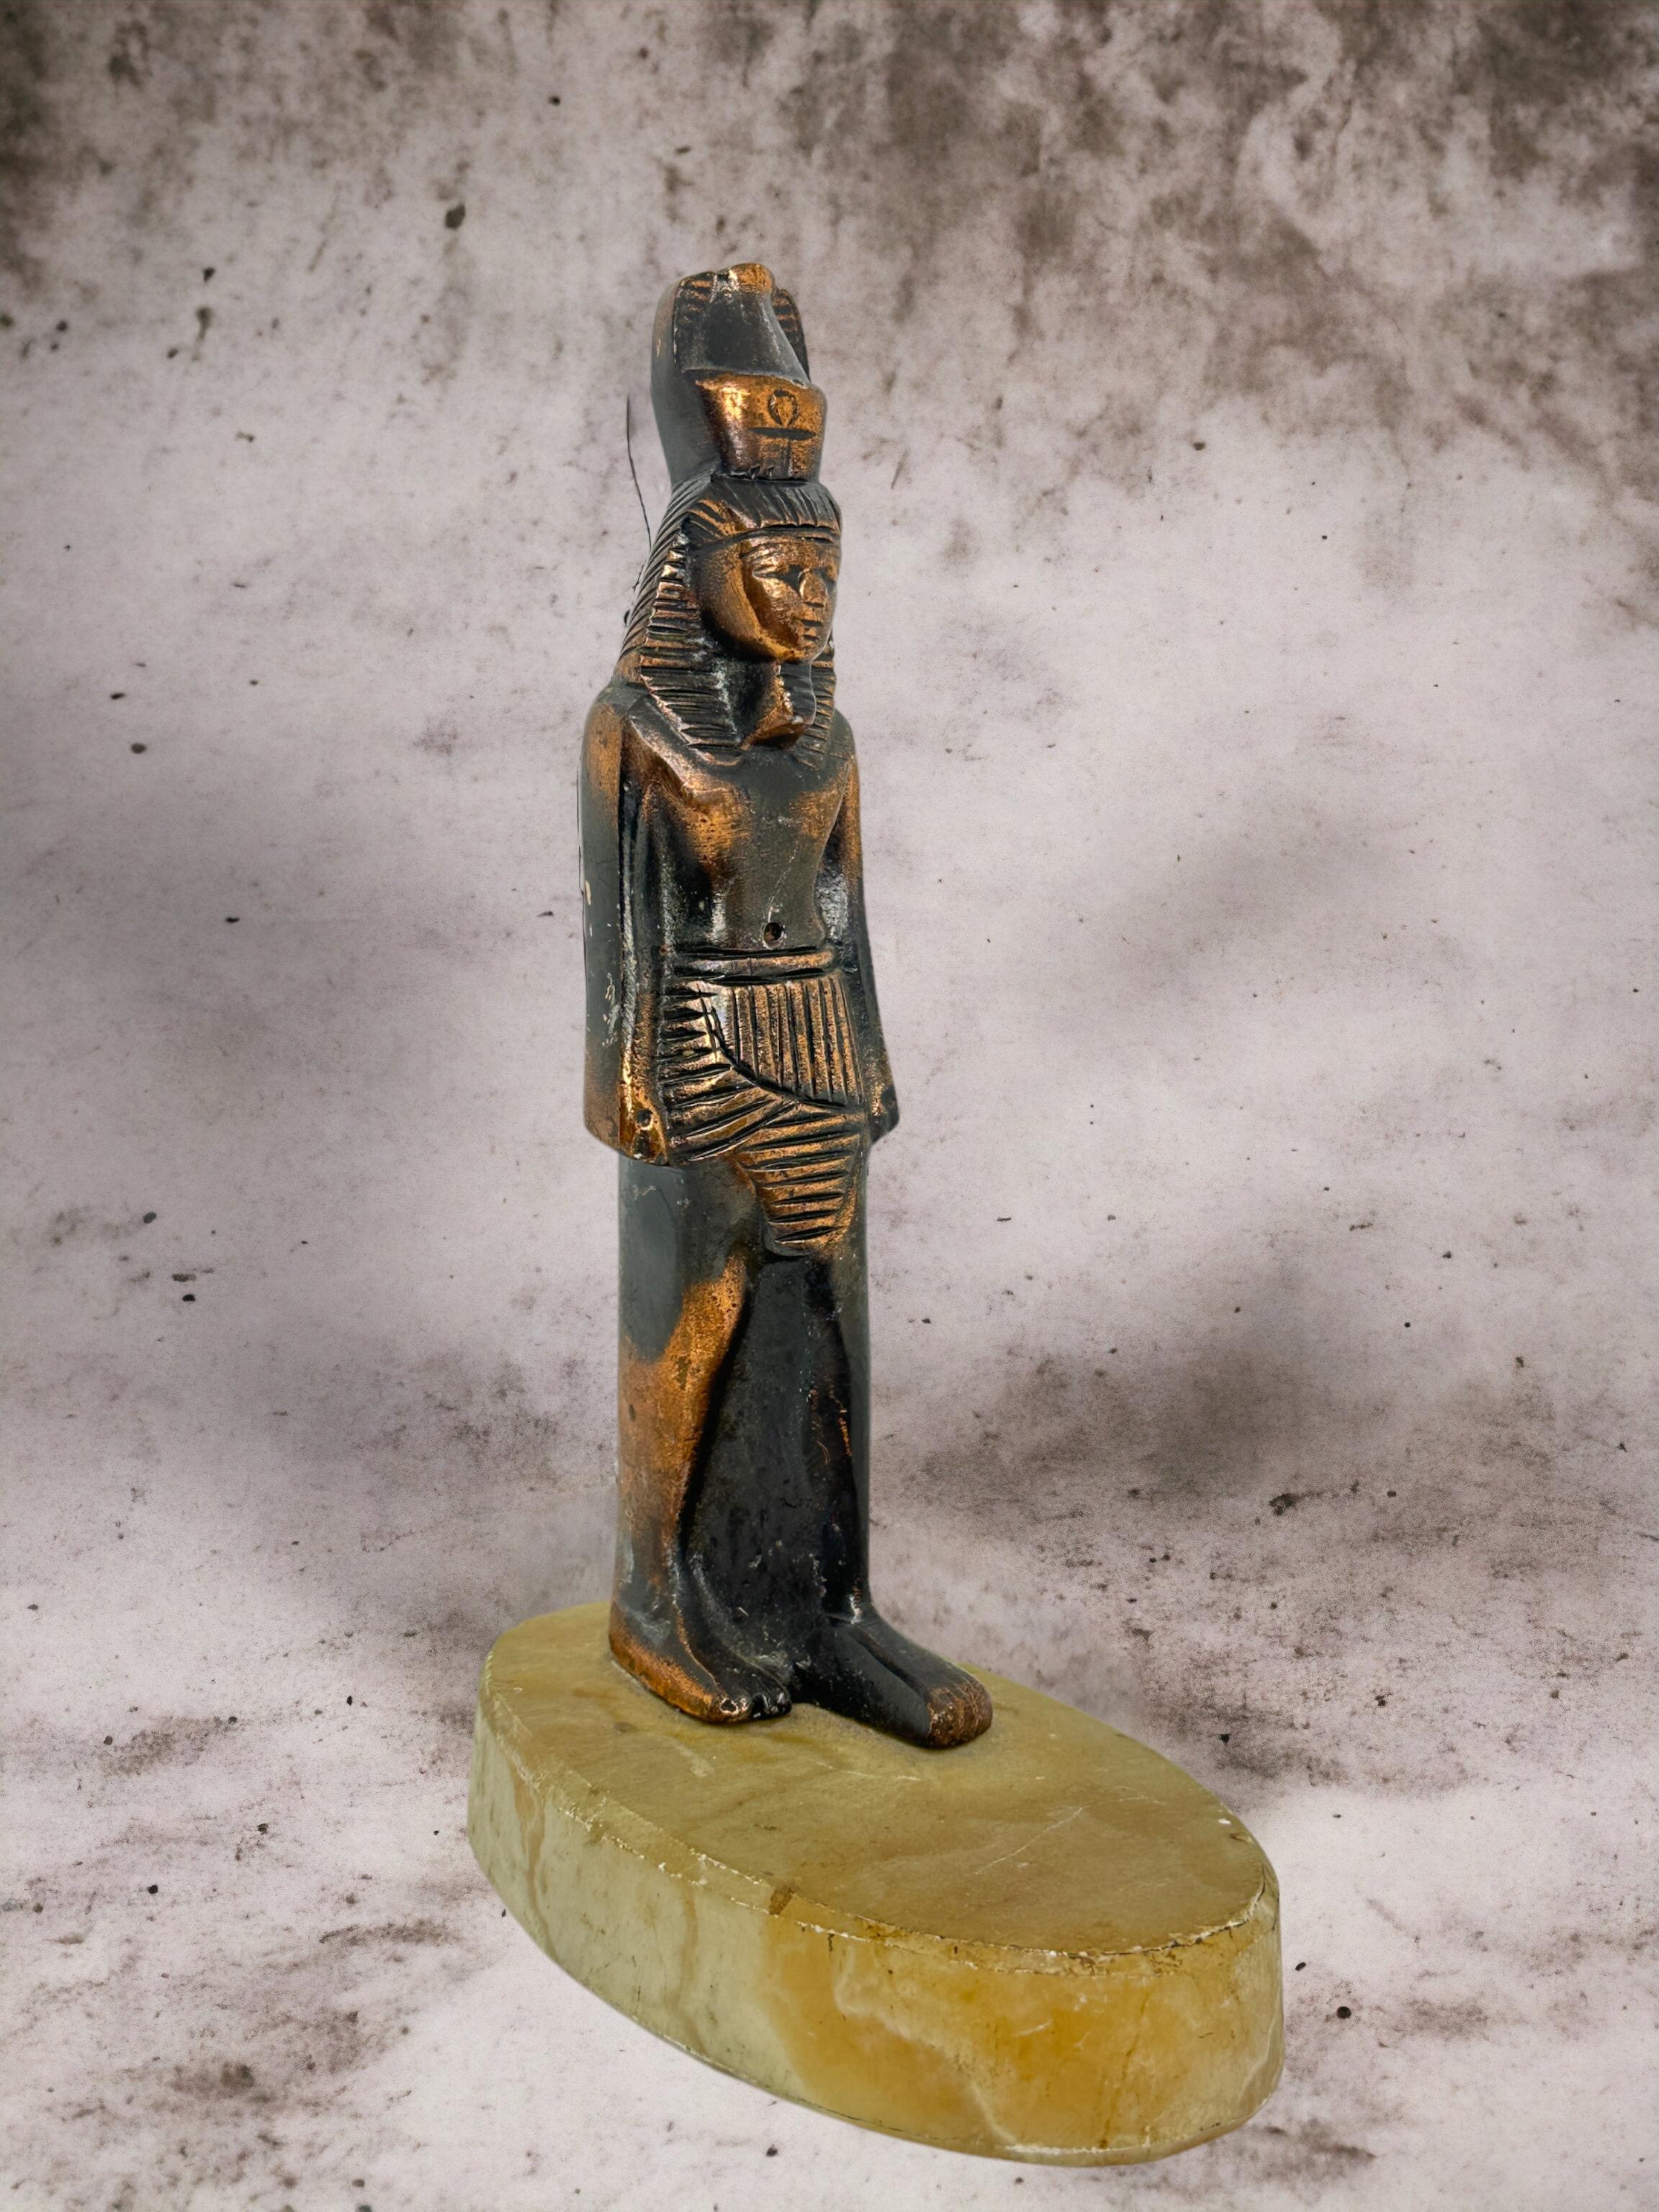 A beautifully crafted statue of an ancient Egyptian pharaoh, I believe it is Ramses the 2nd however I am not completely sure. The statue appears to be made of copper or white metal. It is fixed to an alabaster base.
A stunning piece of home decor